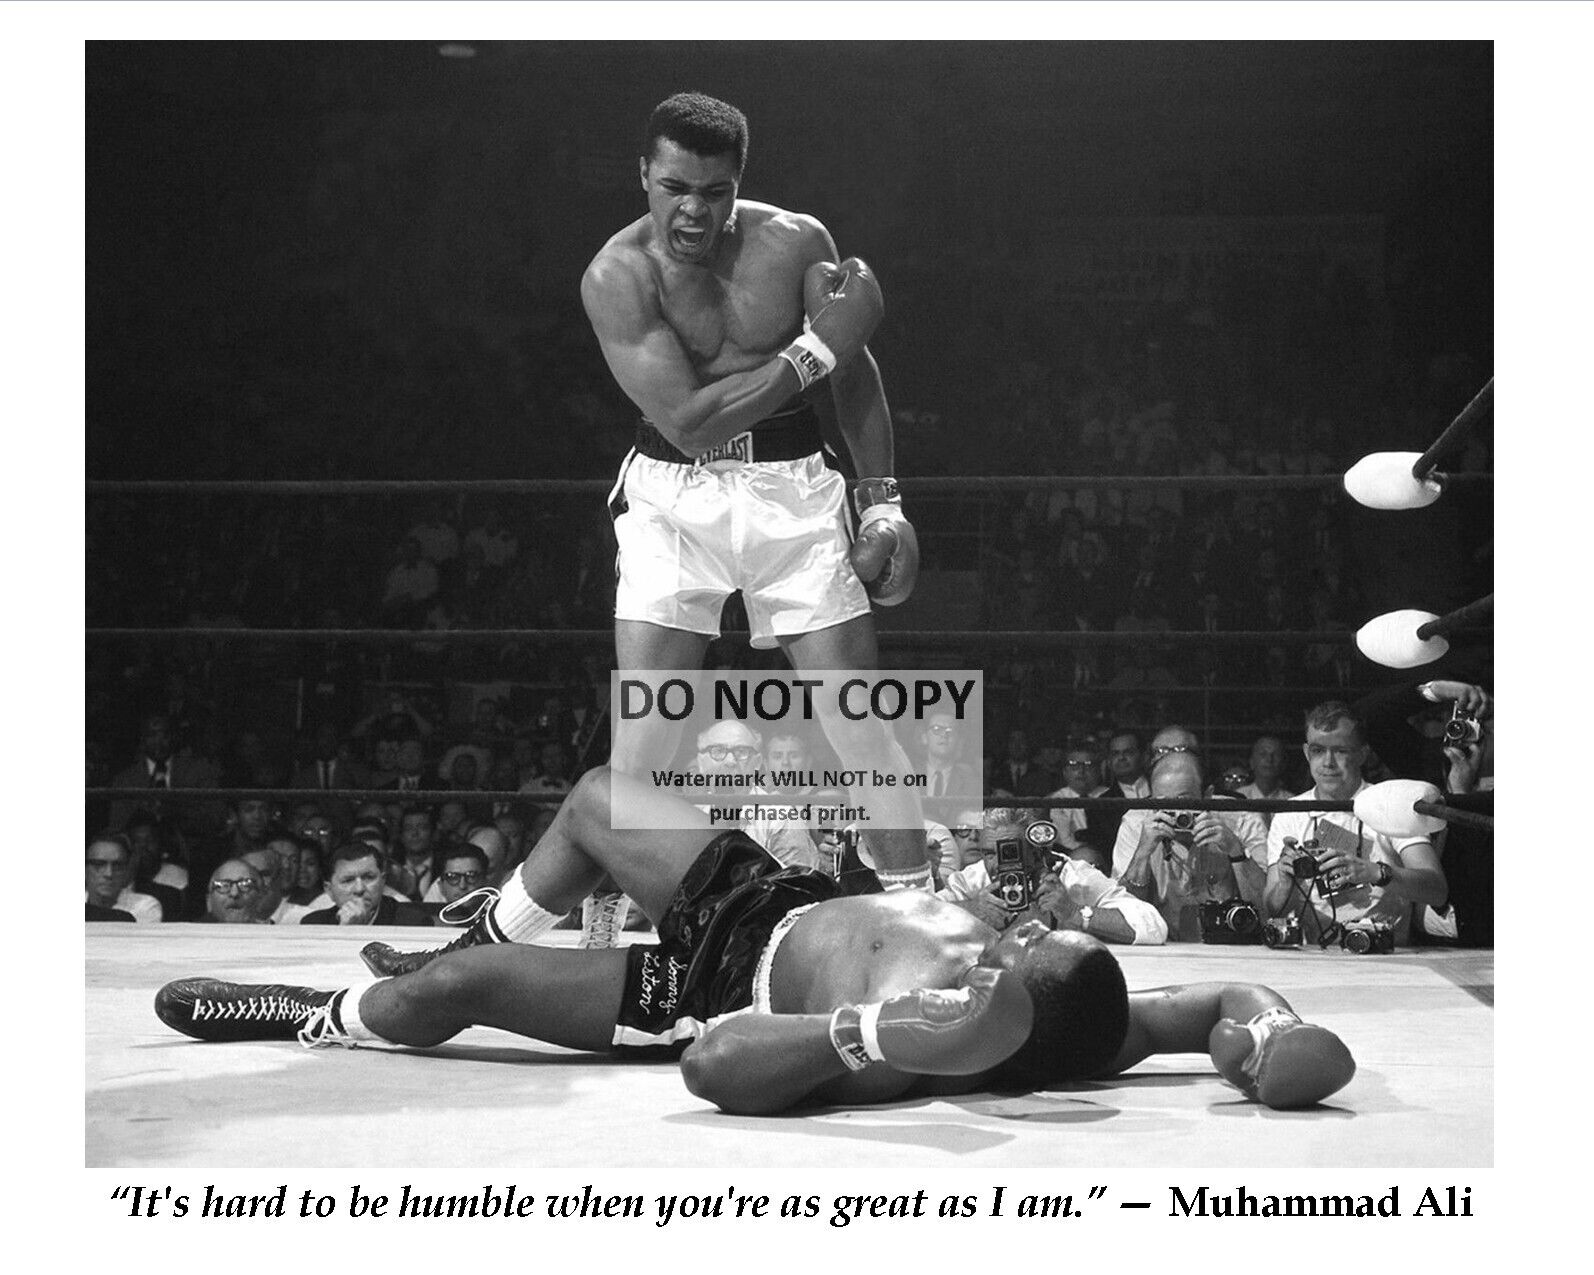 MUHAMMAD ALI FAMOUS QUOTE FROM BOXING LEGEND - 8X10 PHOTO (PQ-005)